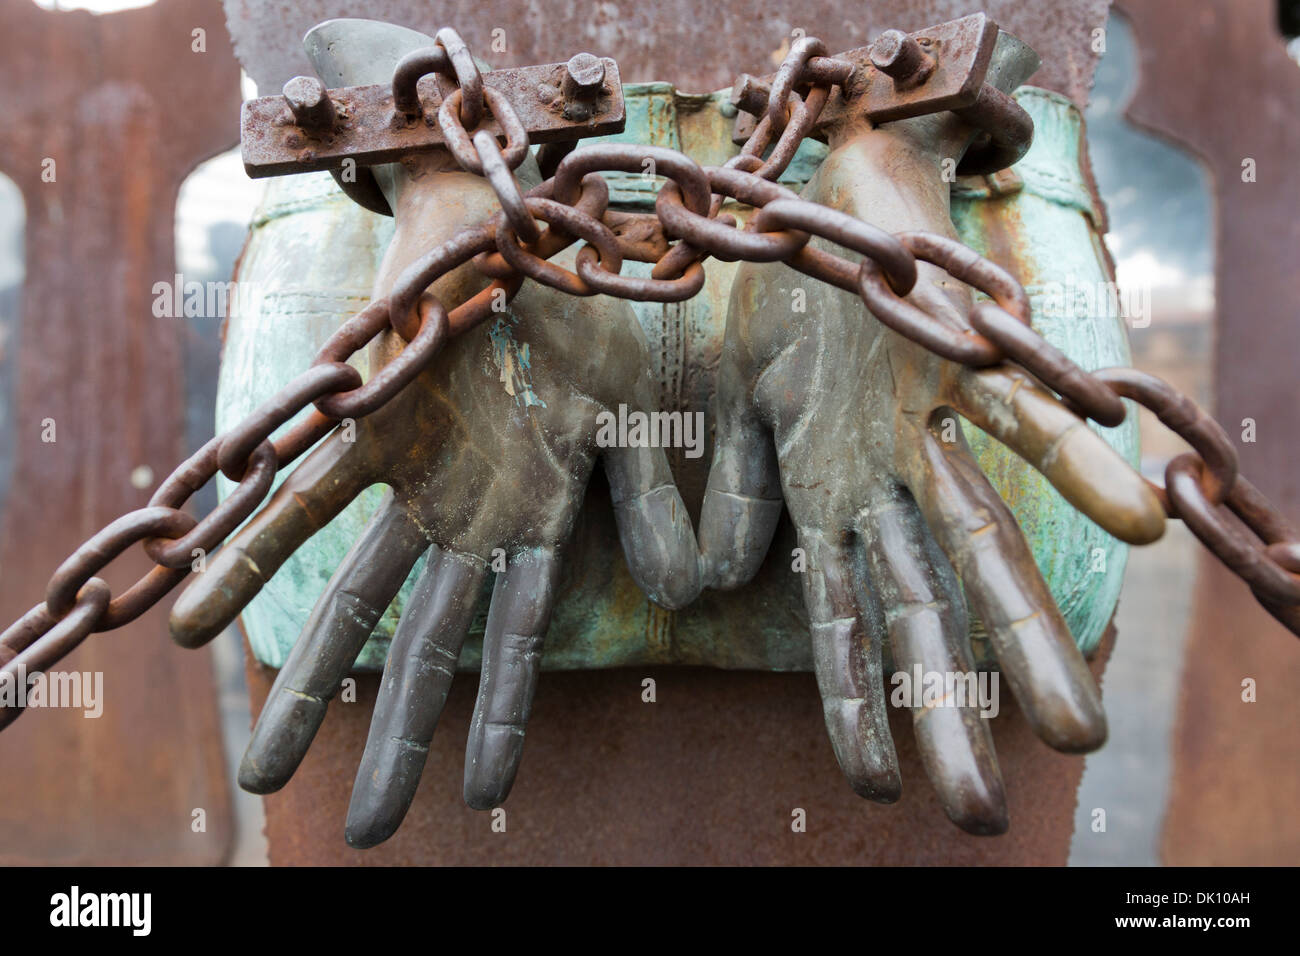 Hands in rusty chains, statue against fascism near the train station of Ostiense, Rome, Italy Stock Photo